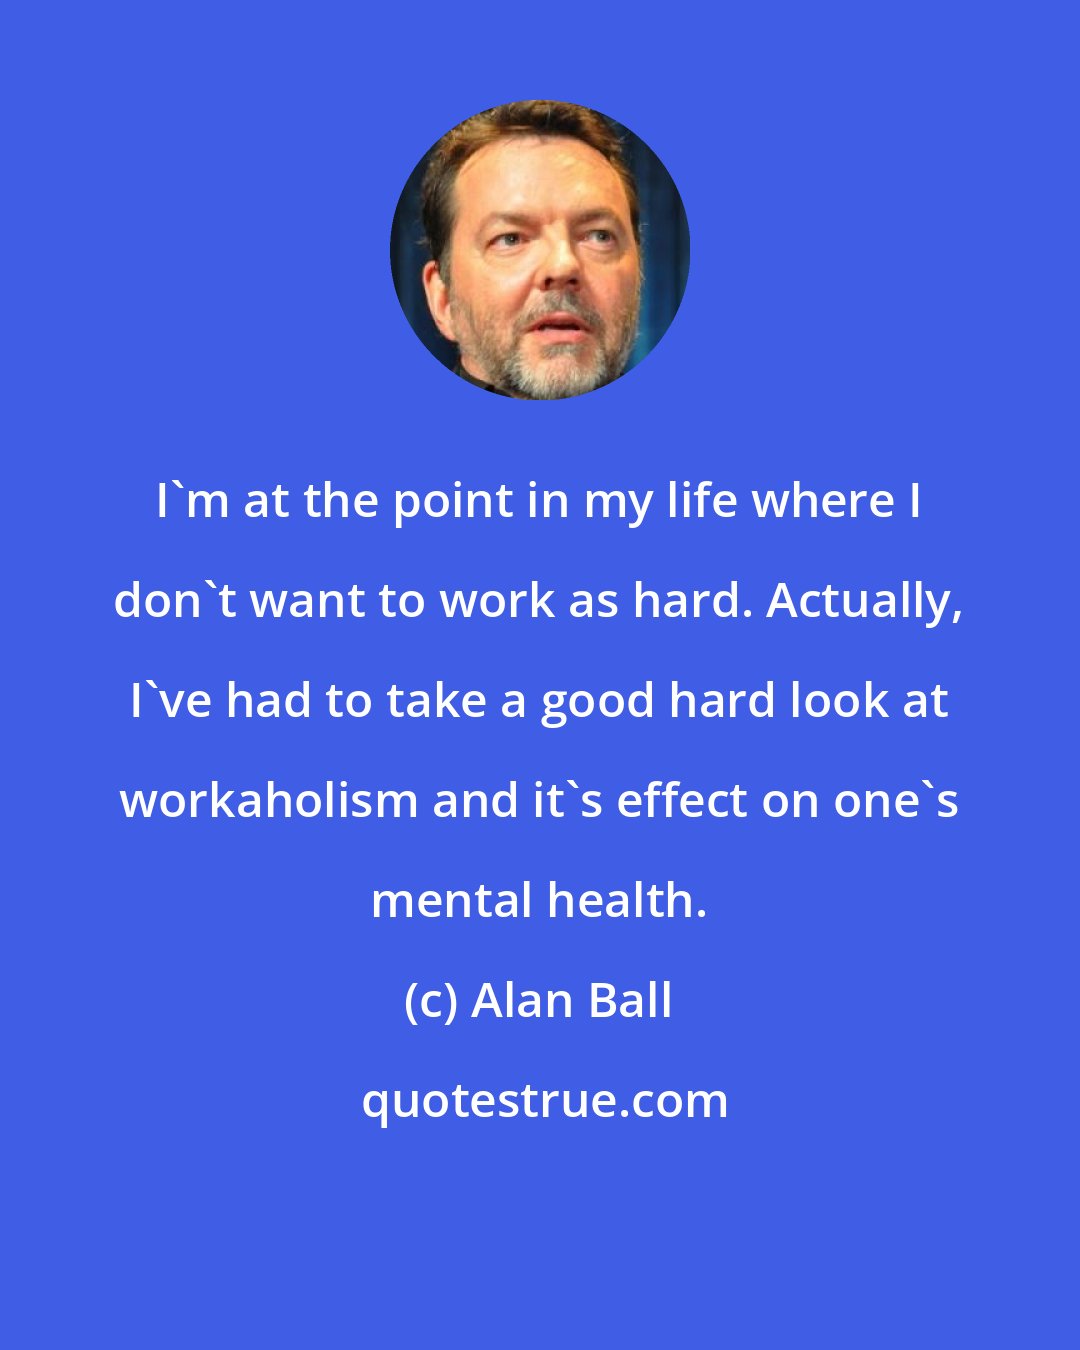 Alan Ball: I'm at the point in my life where I don't want to work as hard. Actually, I've had to take a good hard look at workaholism and it's effect on one's mental health.